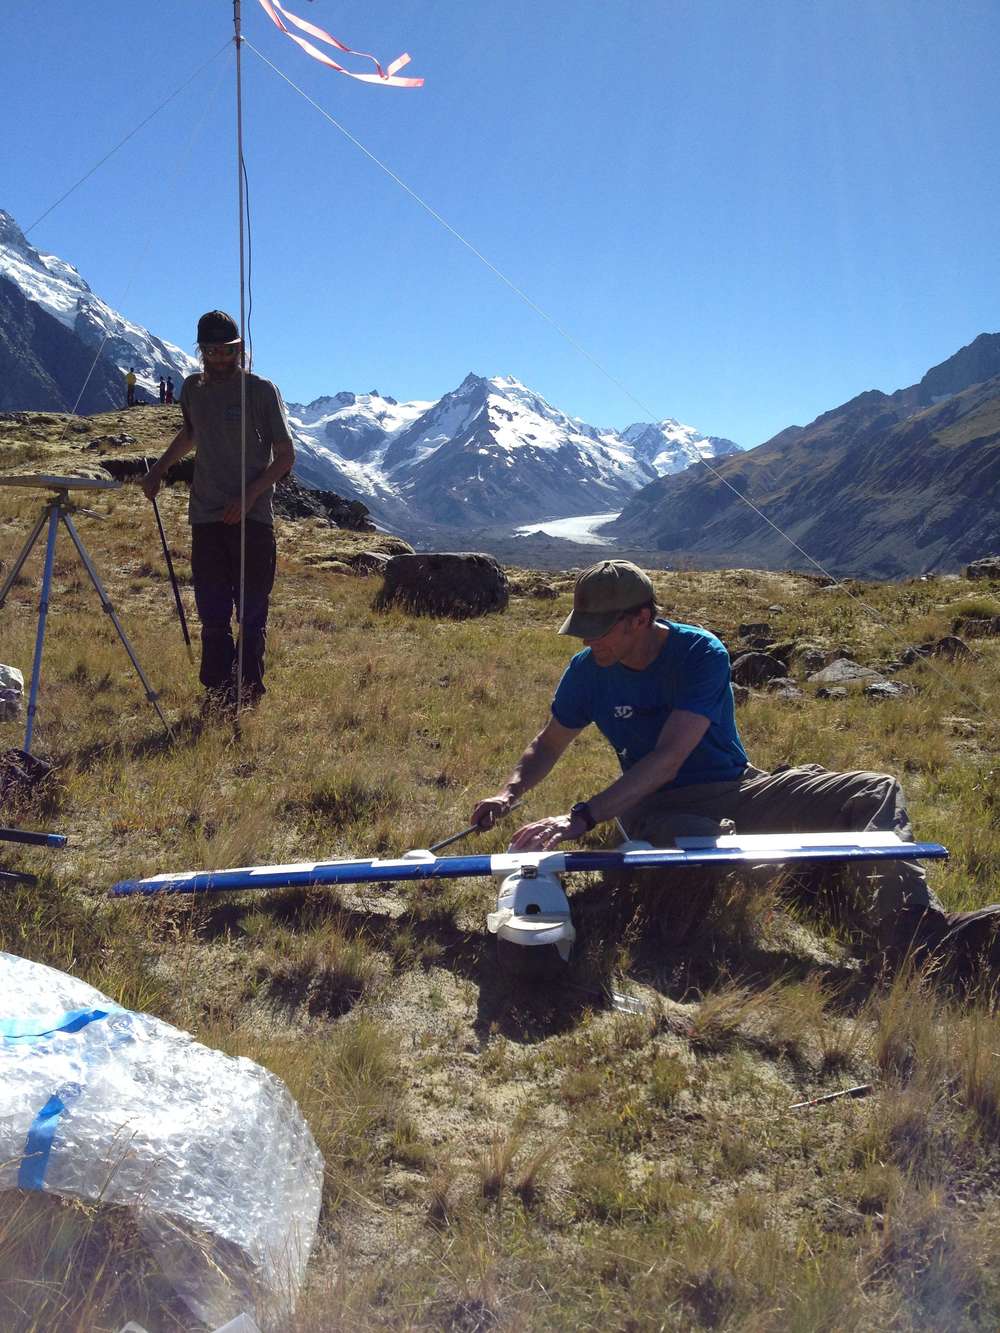 Brian setting up the ground station, and Tom adding the tail to the Sky Hunter.